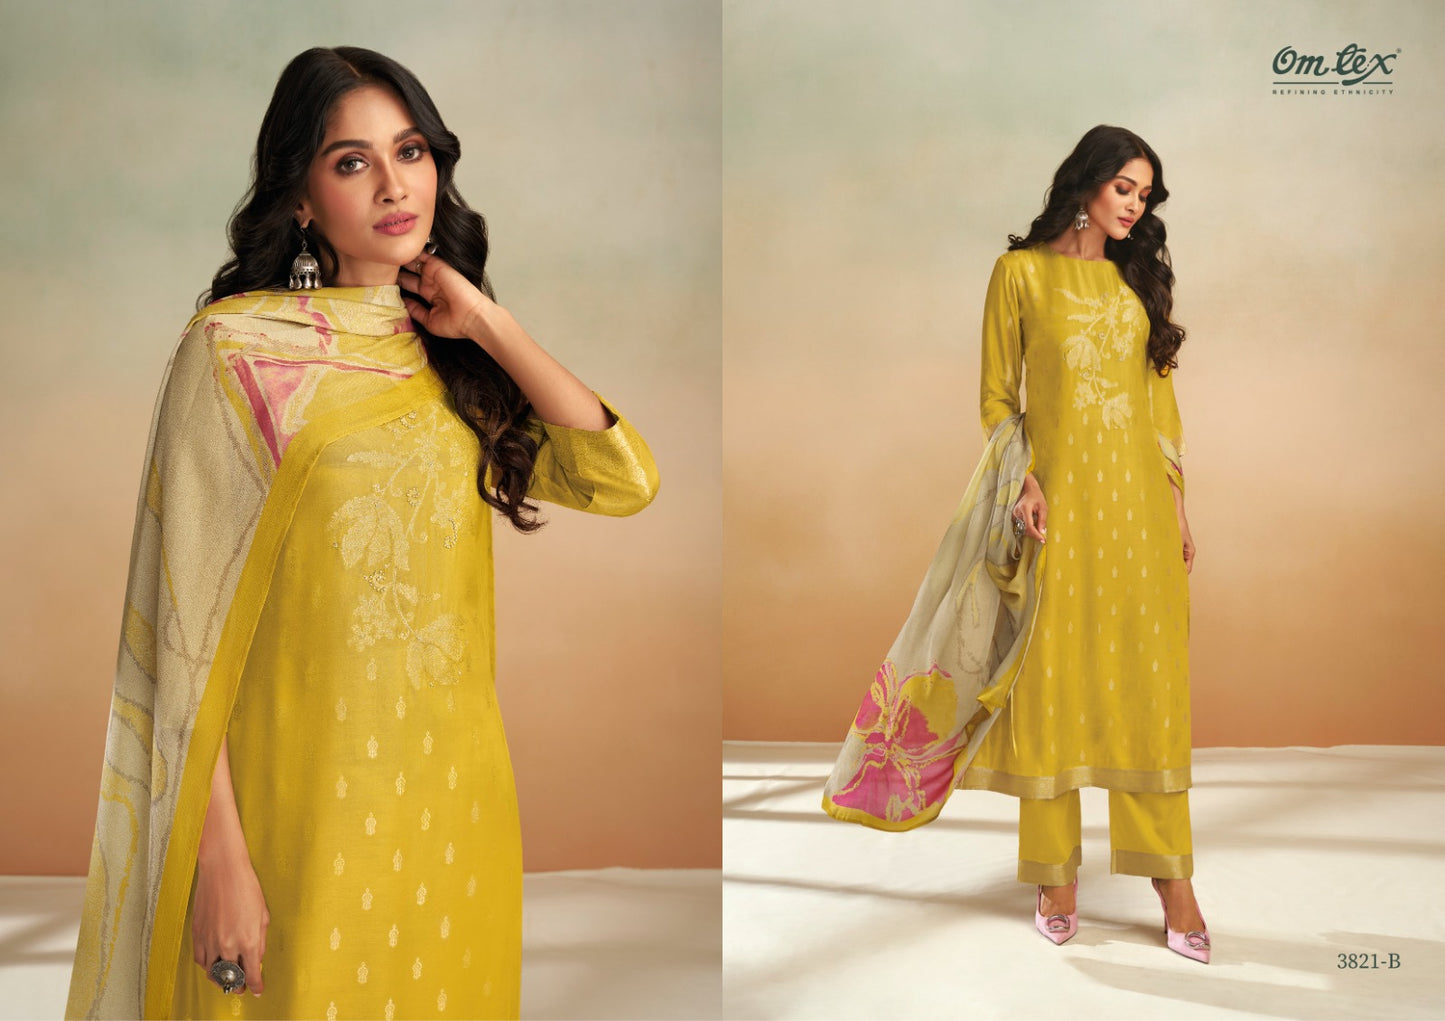 Aamod Vol 20 Omtex Muslin Jacquard Plazzo Style Suits